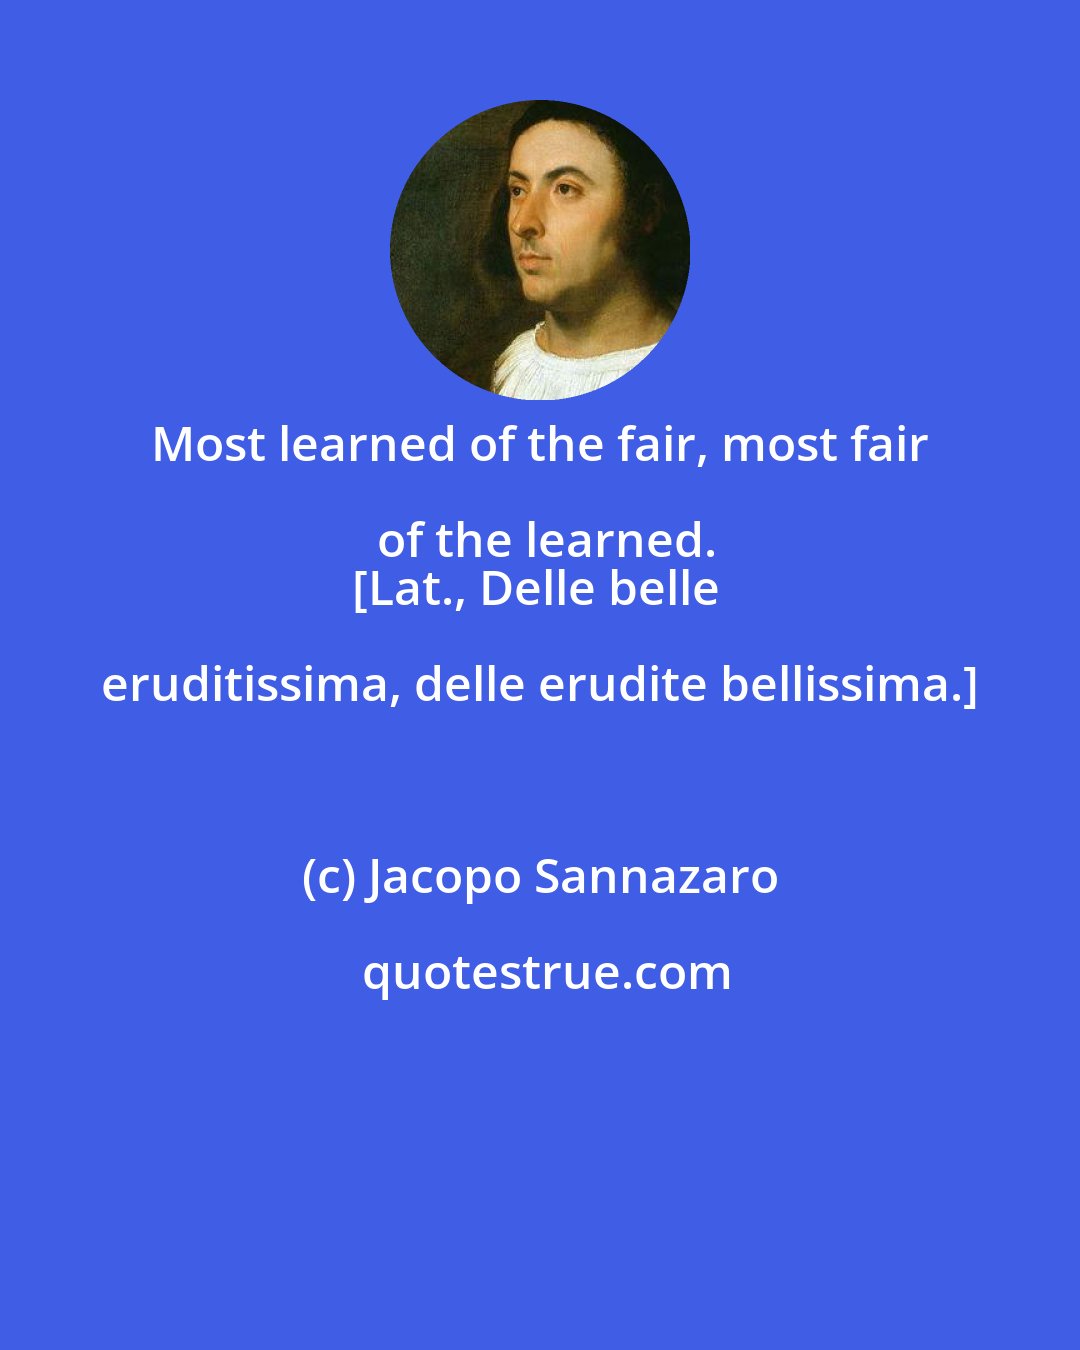 Jacopo Sannazaro: Most learned of the fair, most fair of the learned.
[Lat., Delle belle eruditissima, delle erudite bellissima.]